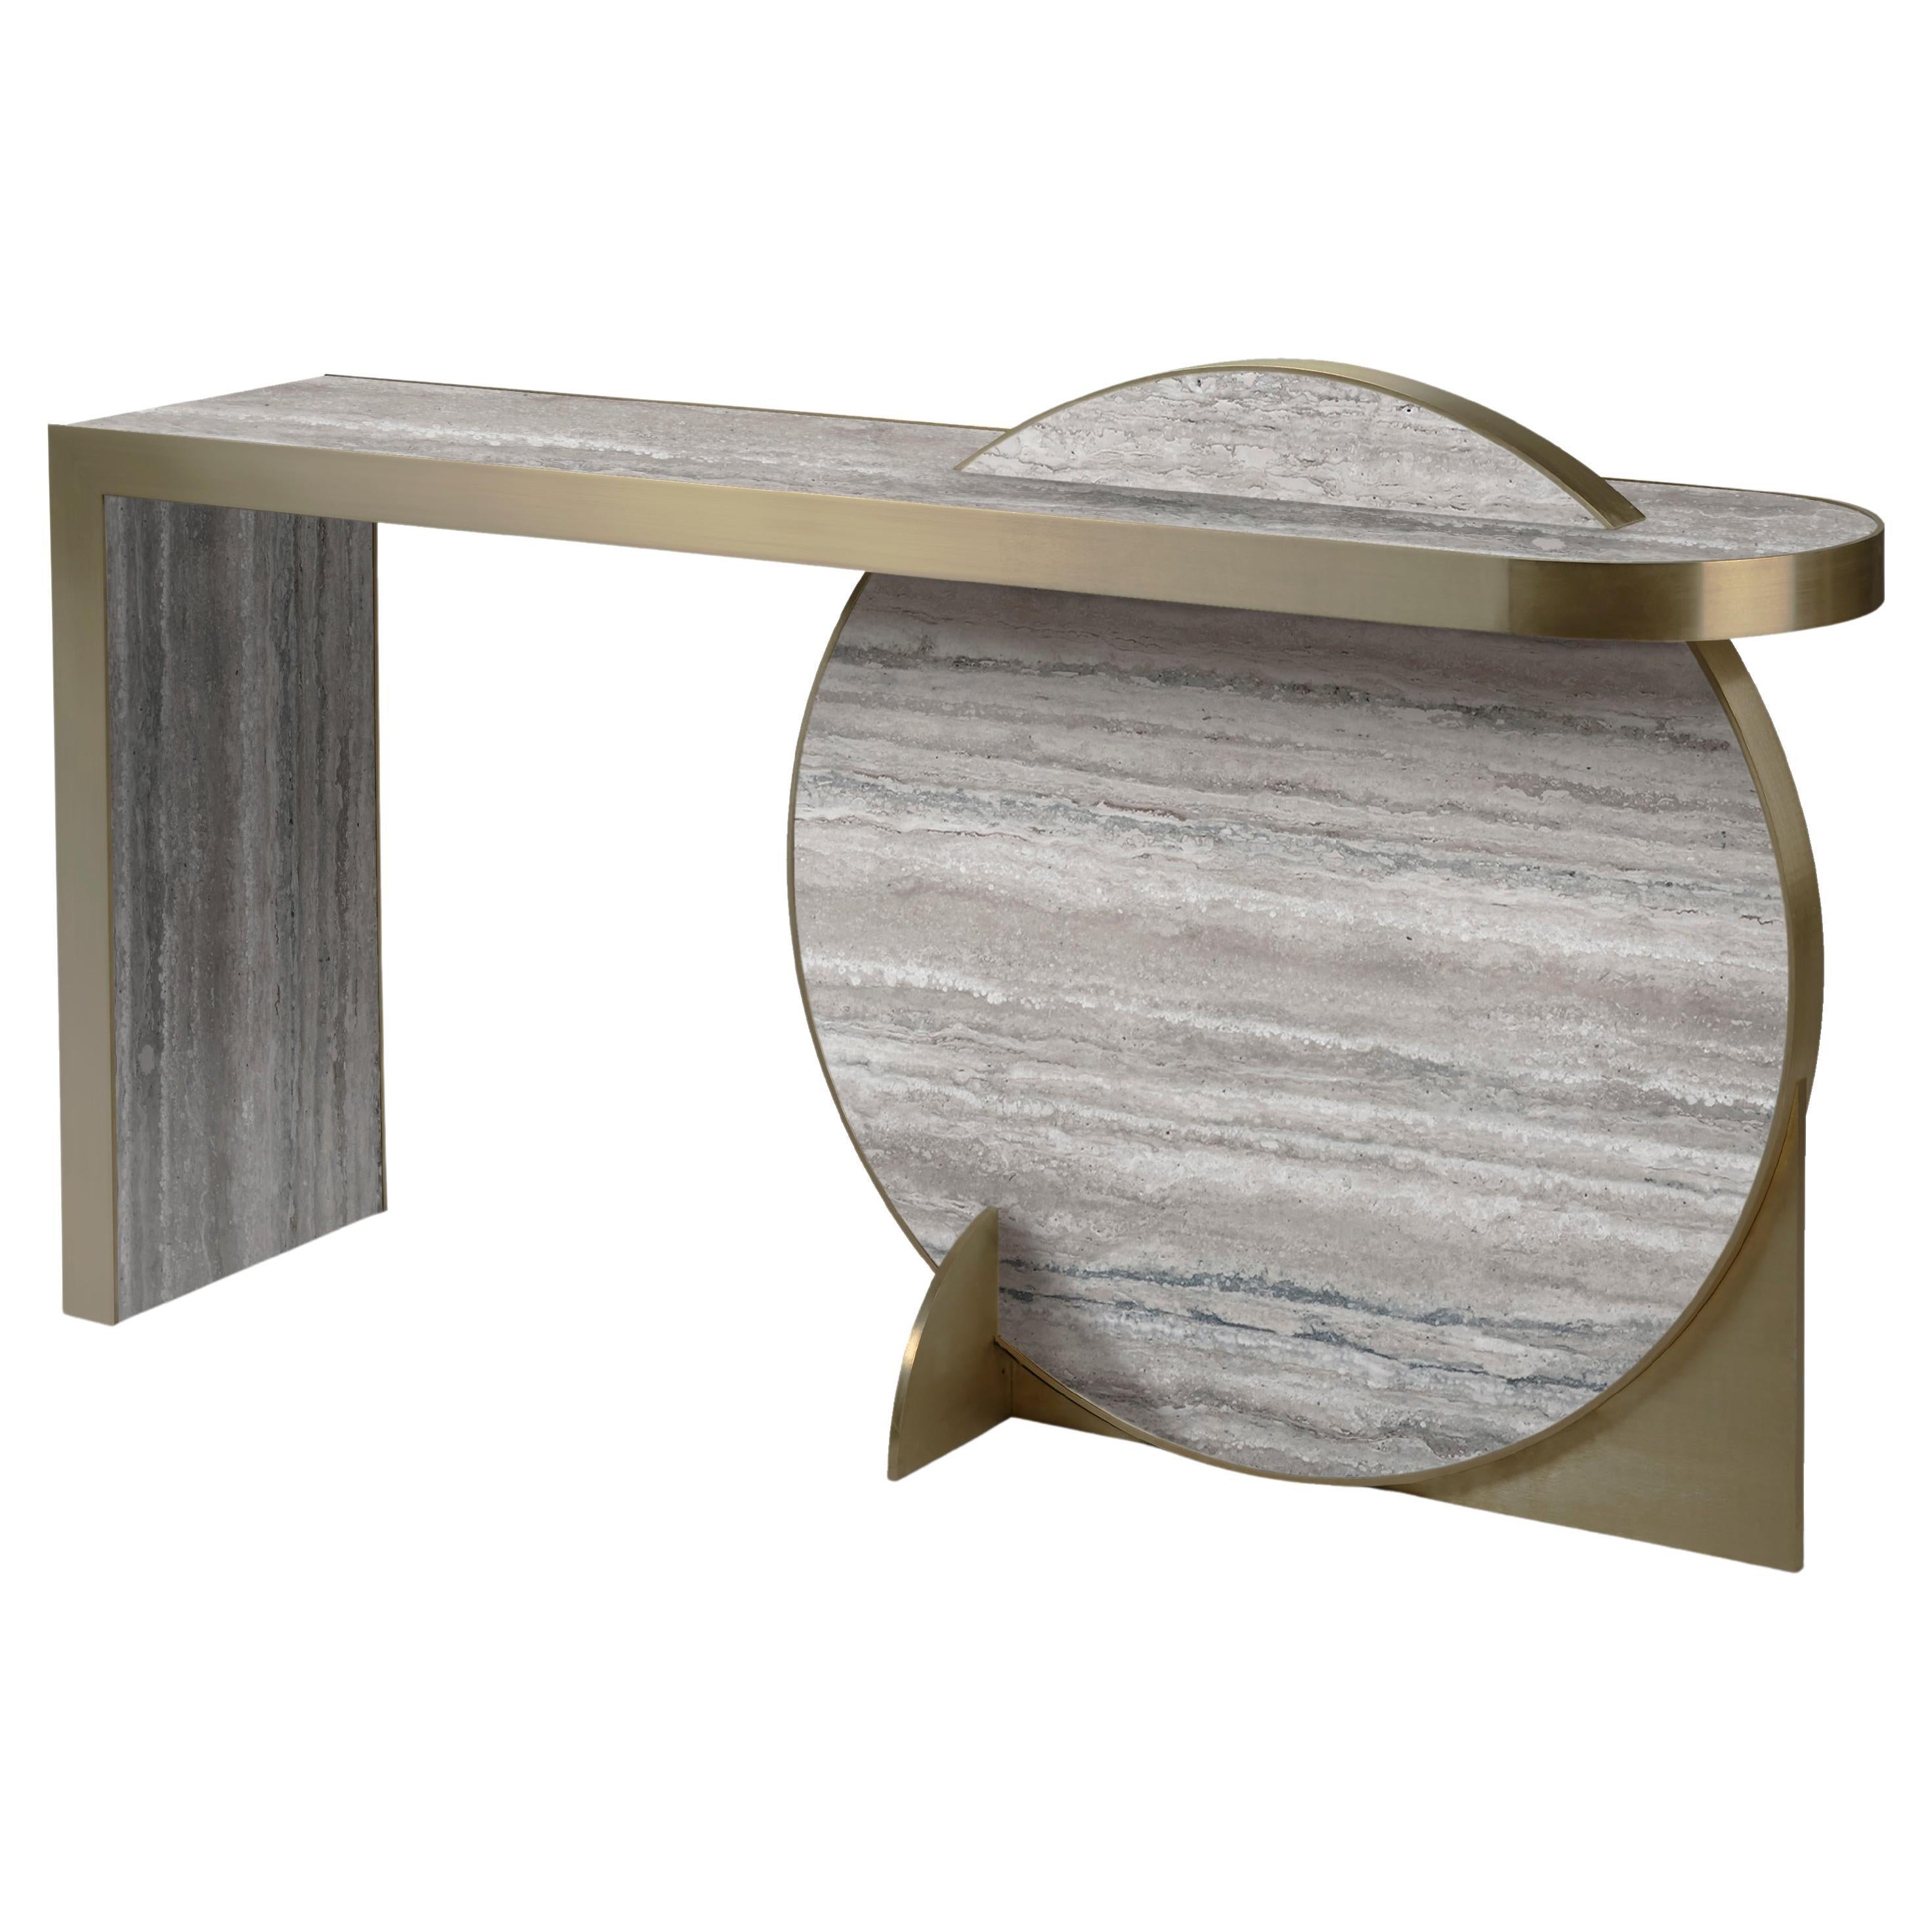 Inspired by the planets and their orbital movements, a recurrent theme in Lara Bohinc’s work, the Lunar Collection features important pieces of furniture, with highly-figured marbles set like jewels within golden rims. Disc shapes bisect or overlay